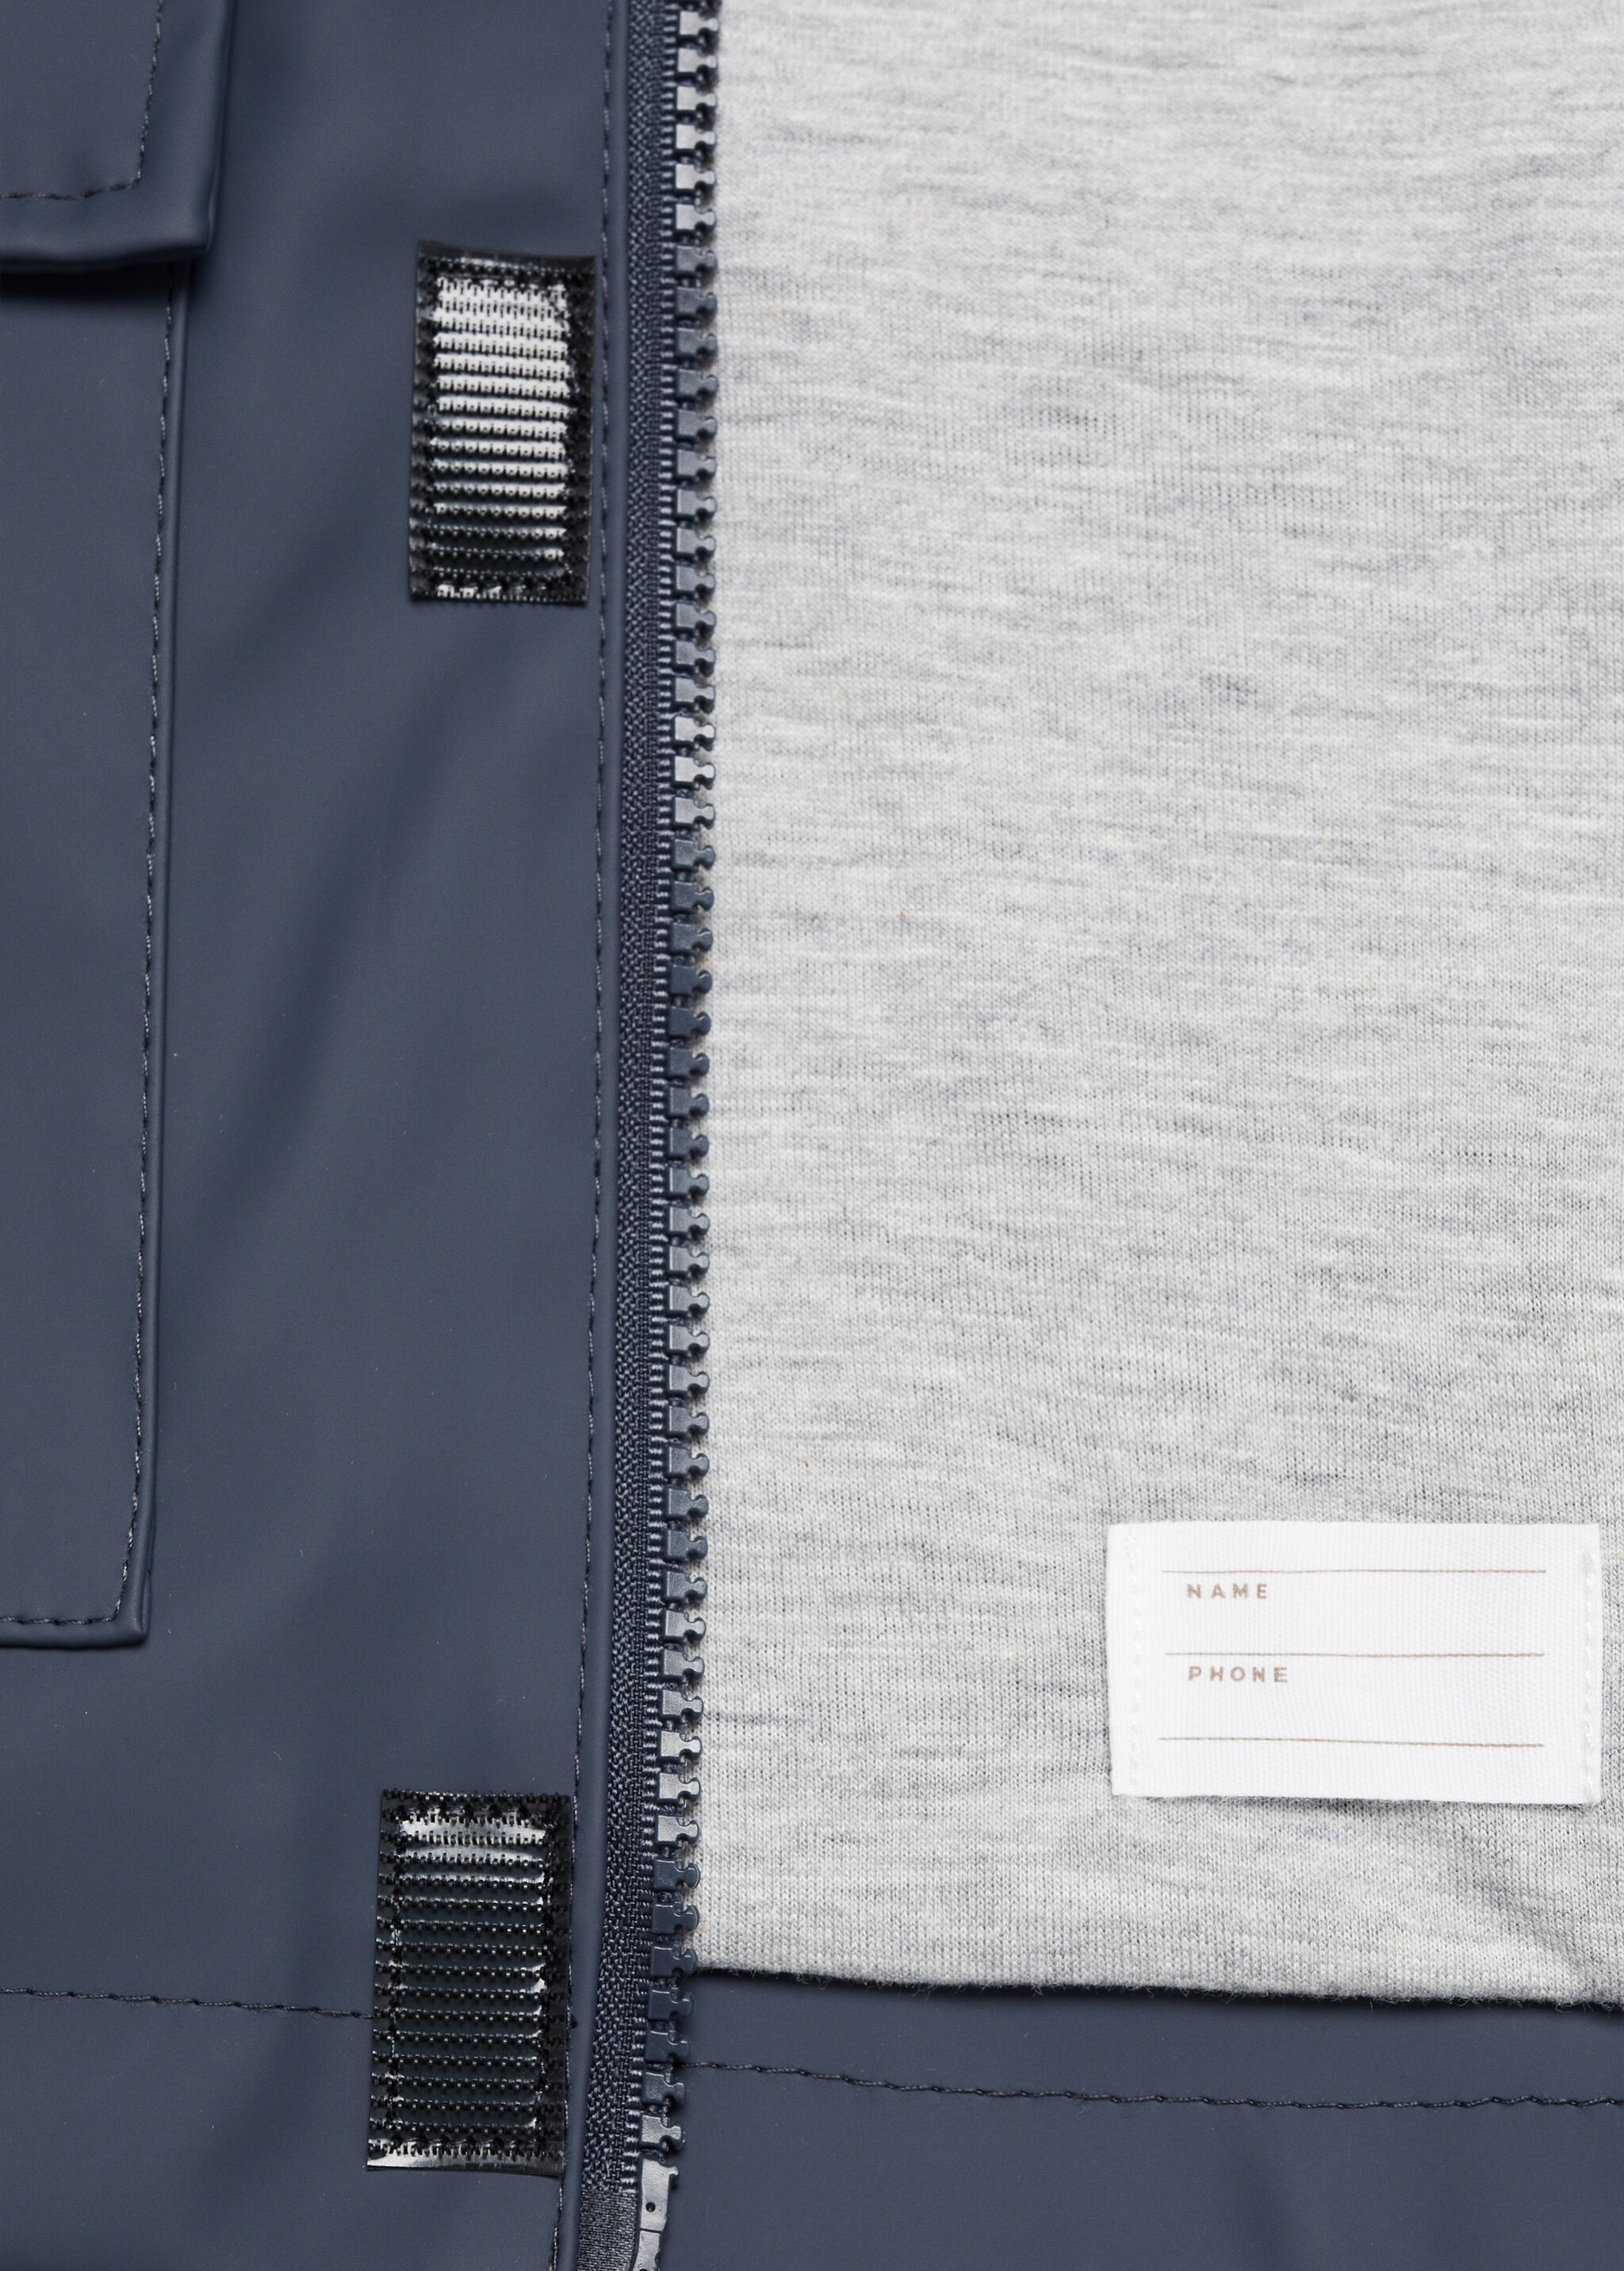 Hooded parka with pocket - Details of the article 8